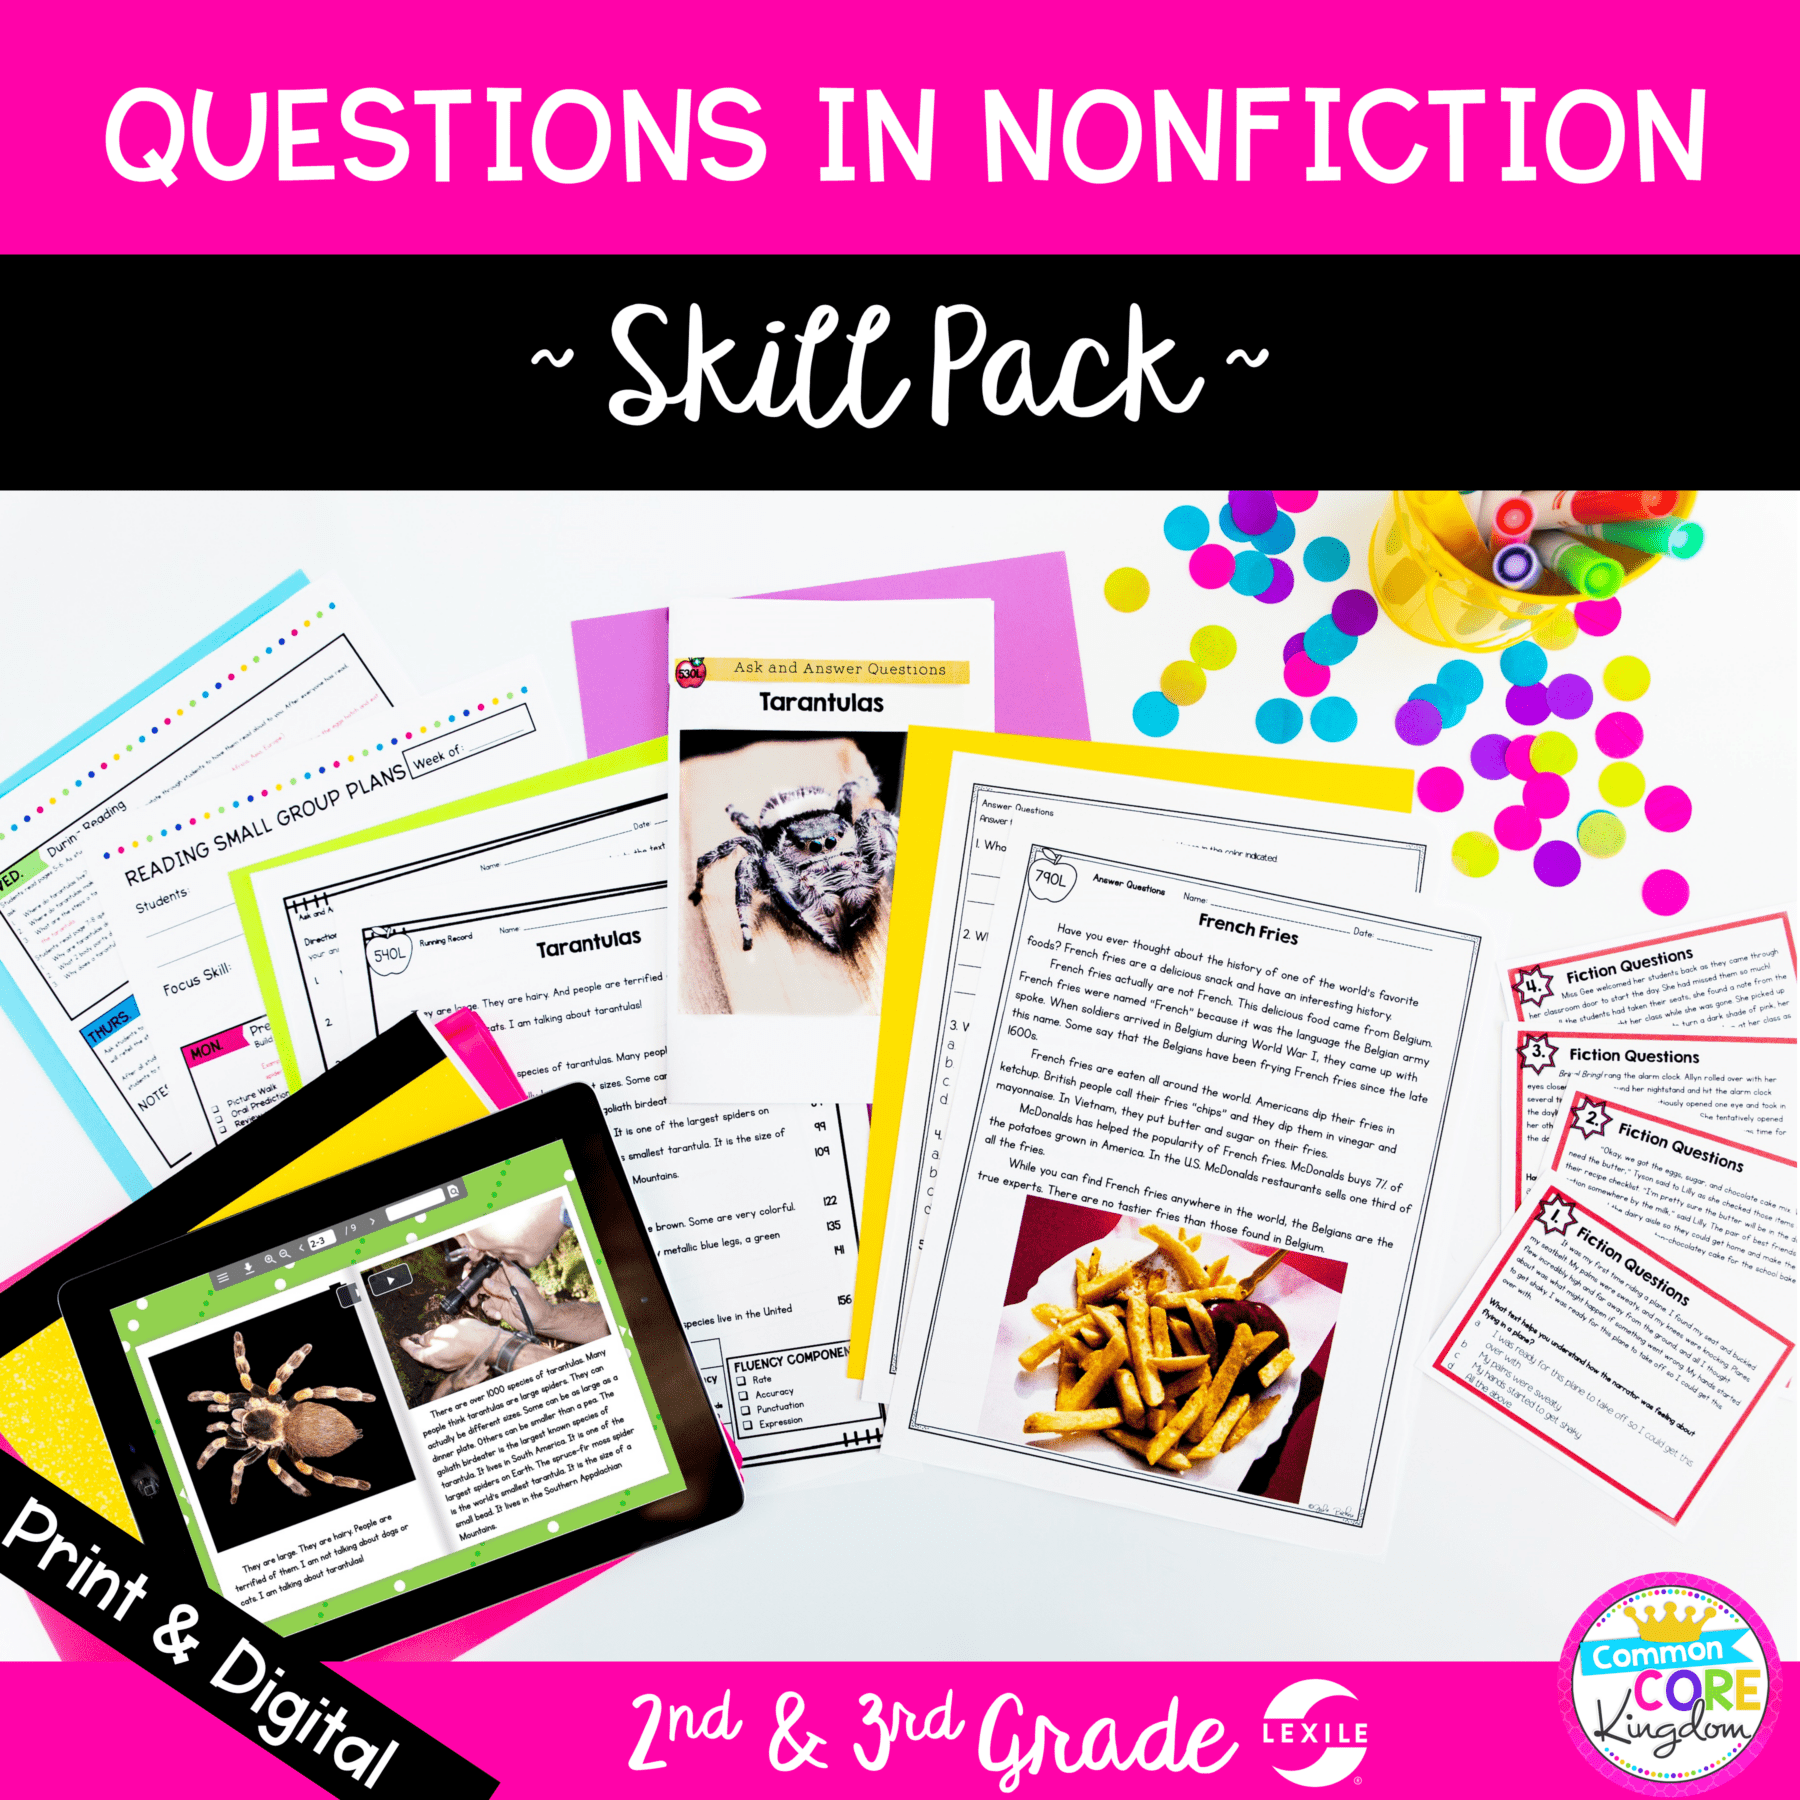 Questions in Nonfiction skill pack cover showing printable and digital reading comprehension worksheets and task cards